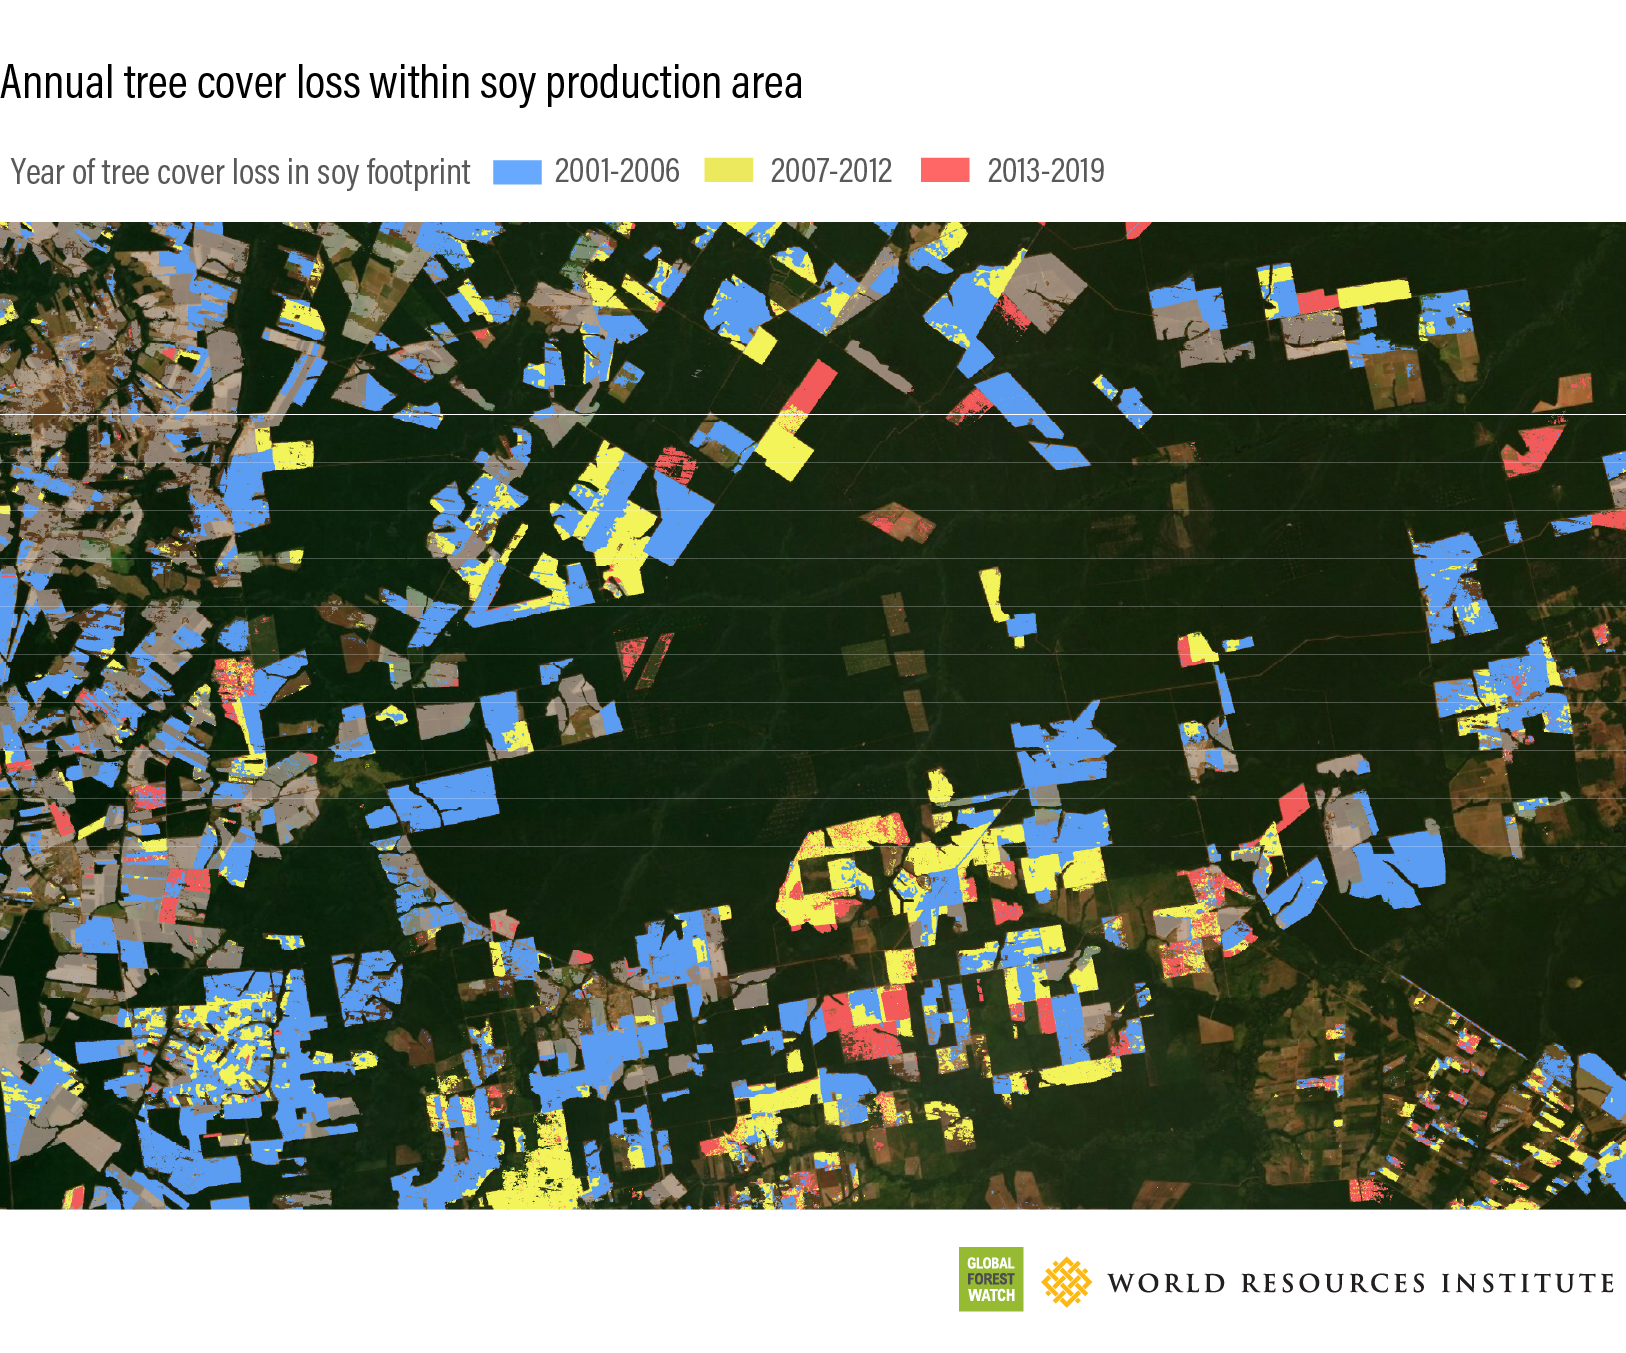 Annual tree cover loss within soy production areas